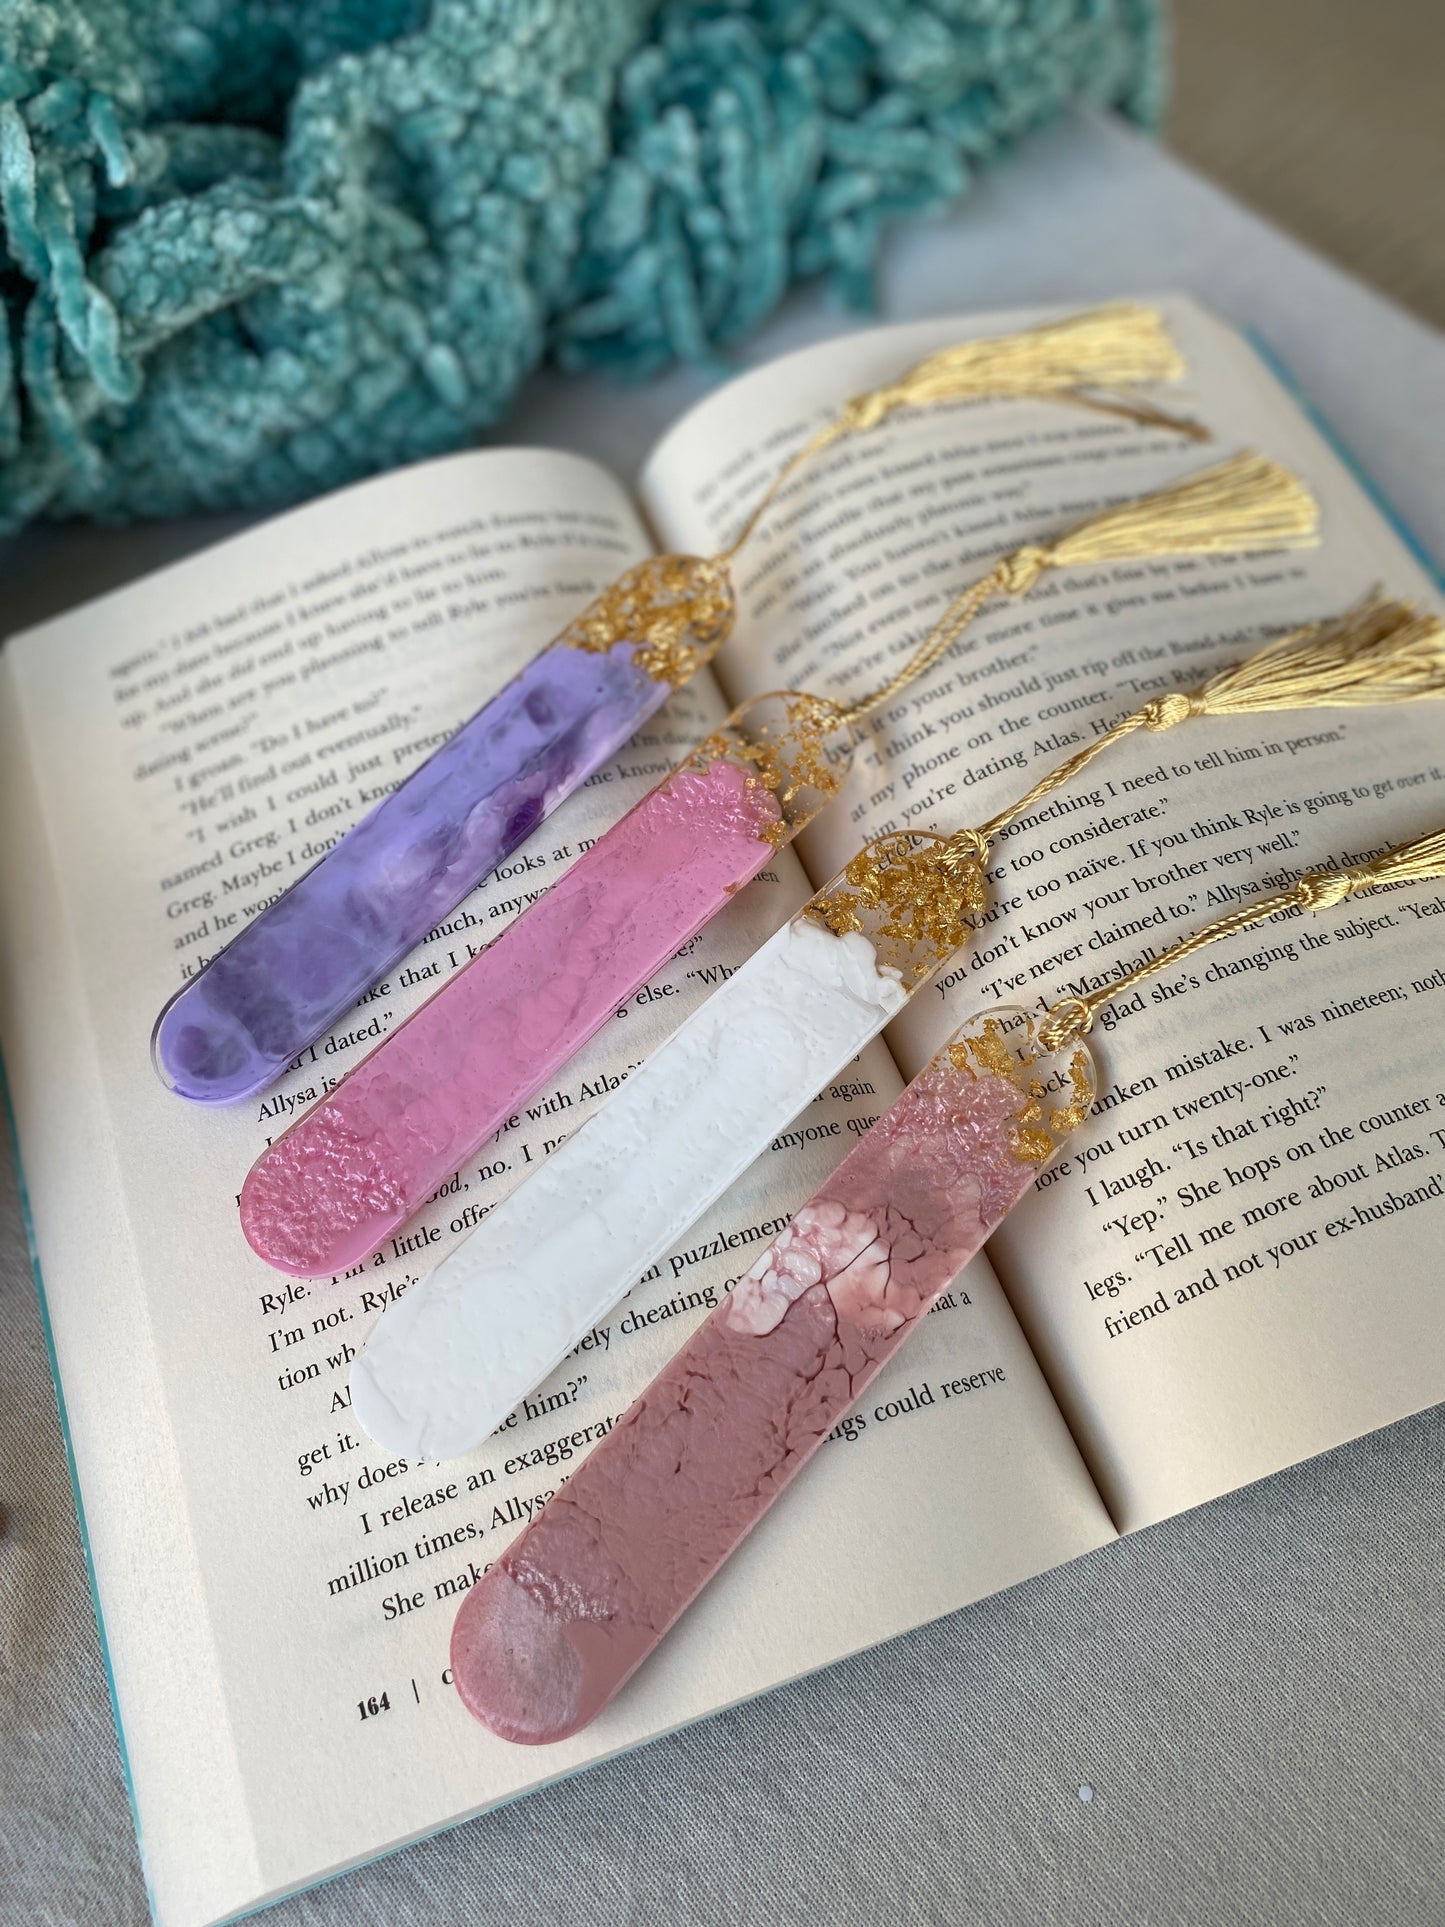 BOOKMARK - created in blush pink resin with gold flakes